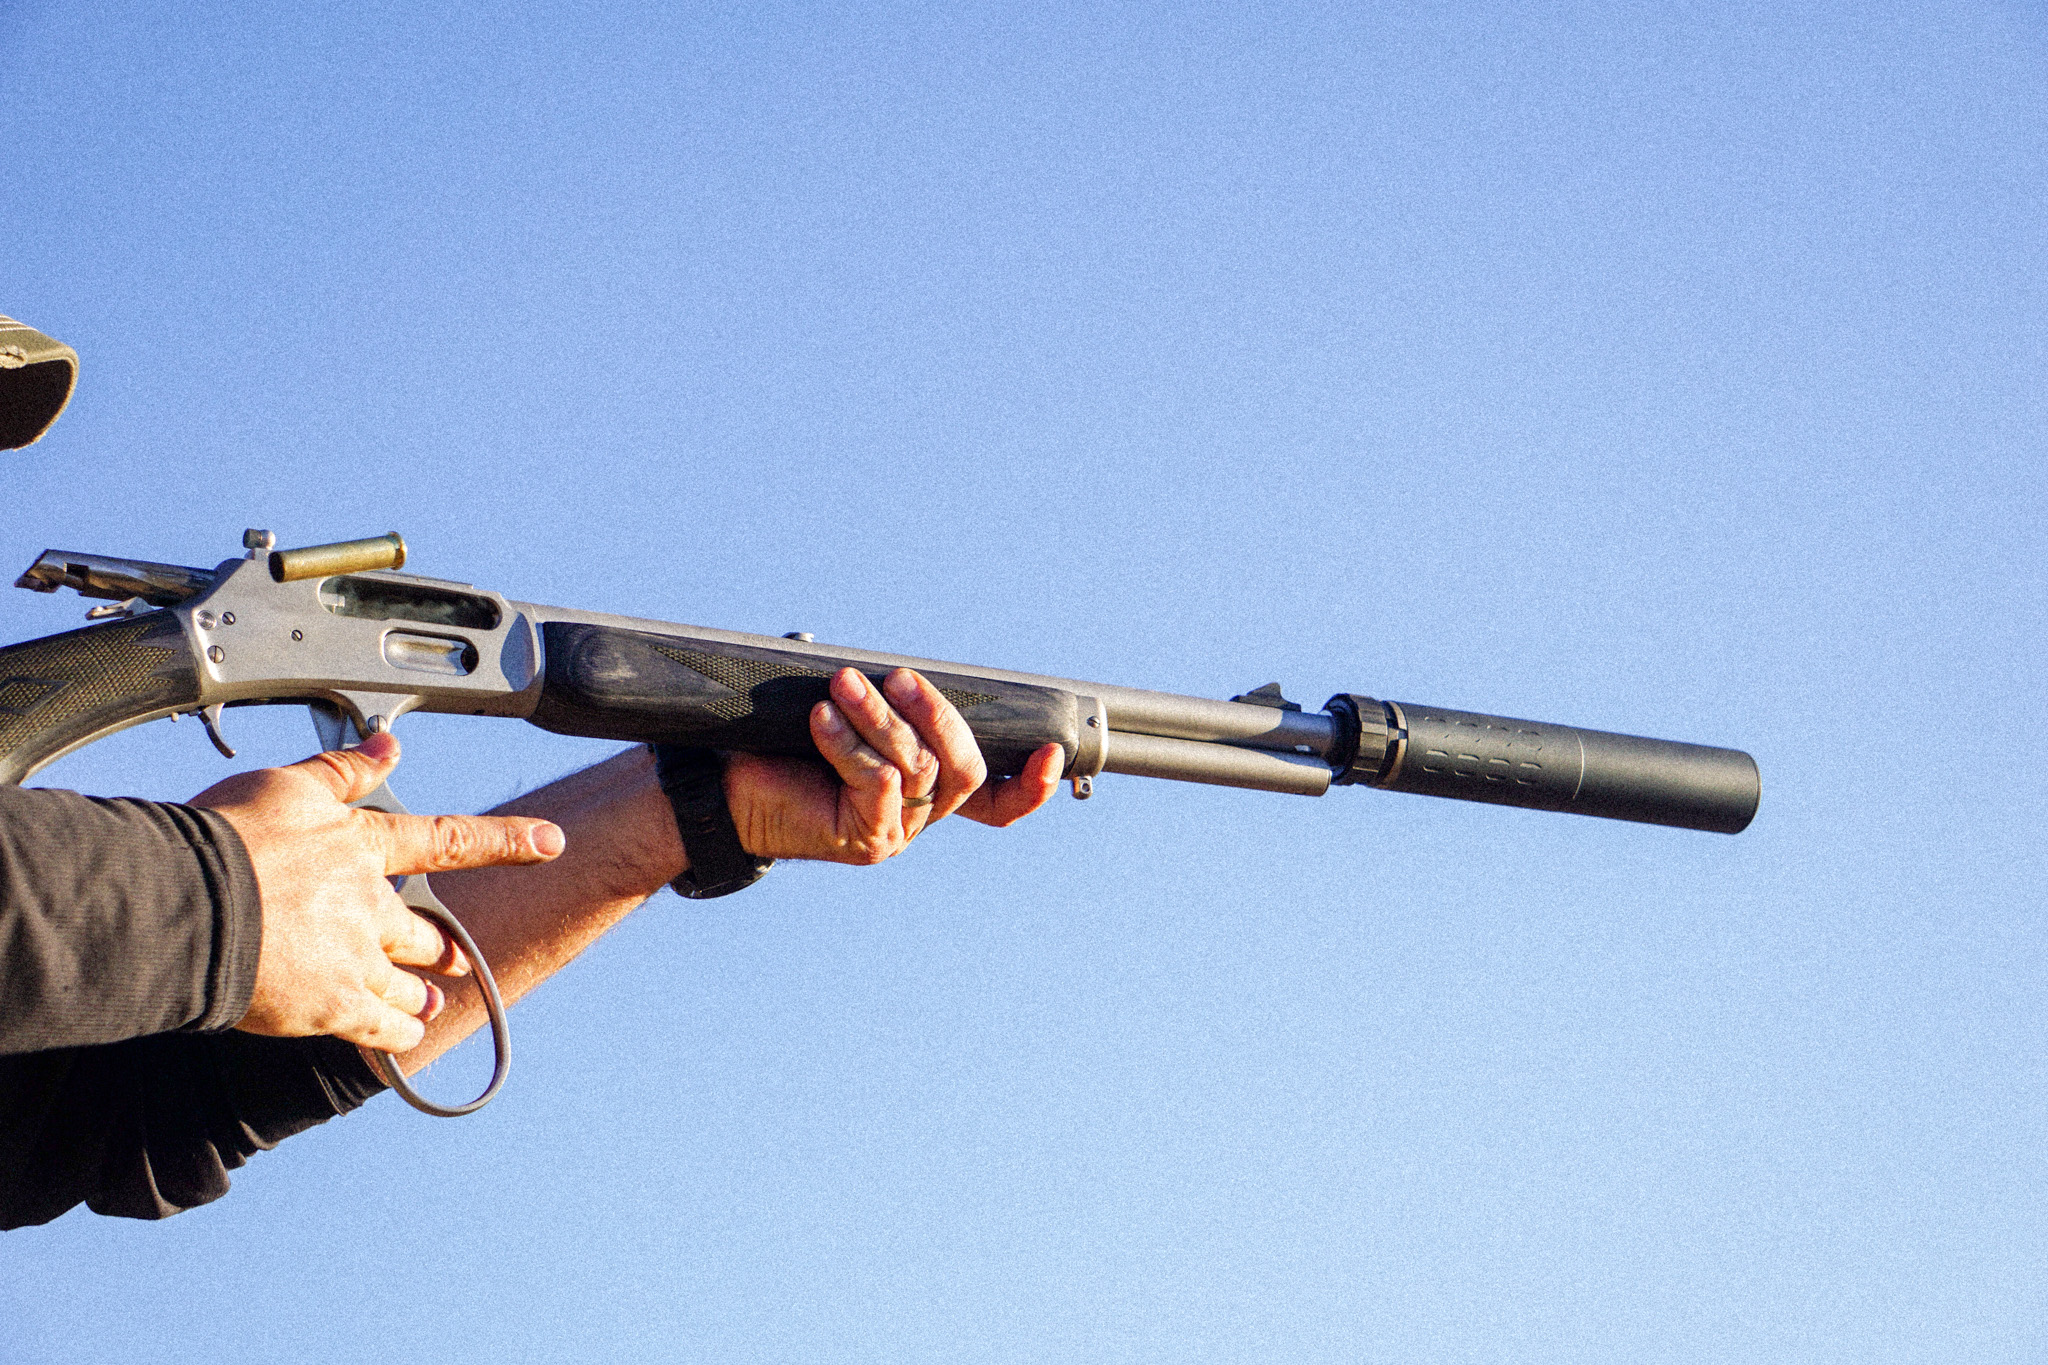 A shooter works the action on a suppressed Marlin lever-action rifle against a blue sky.